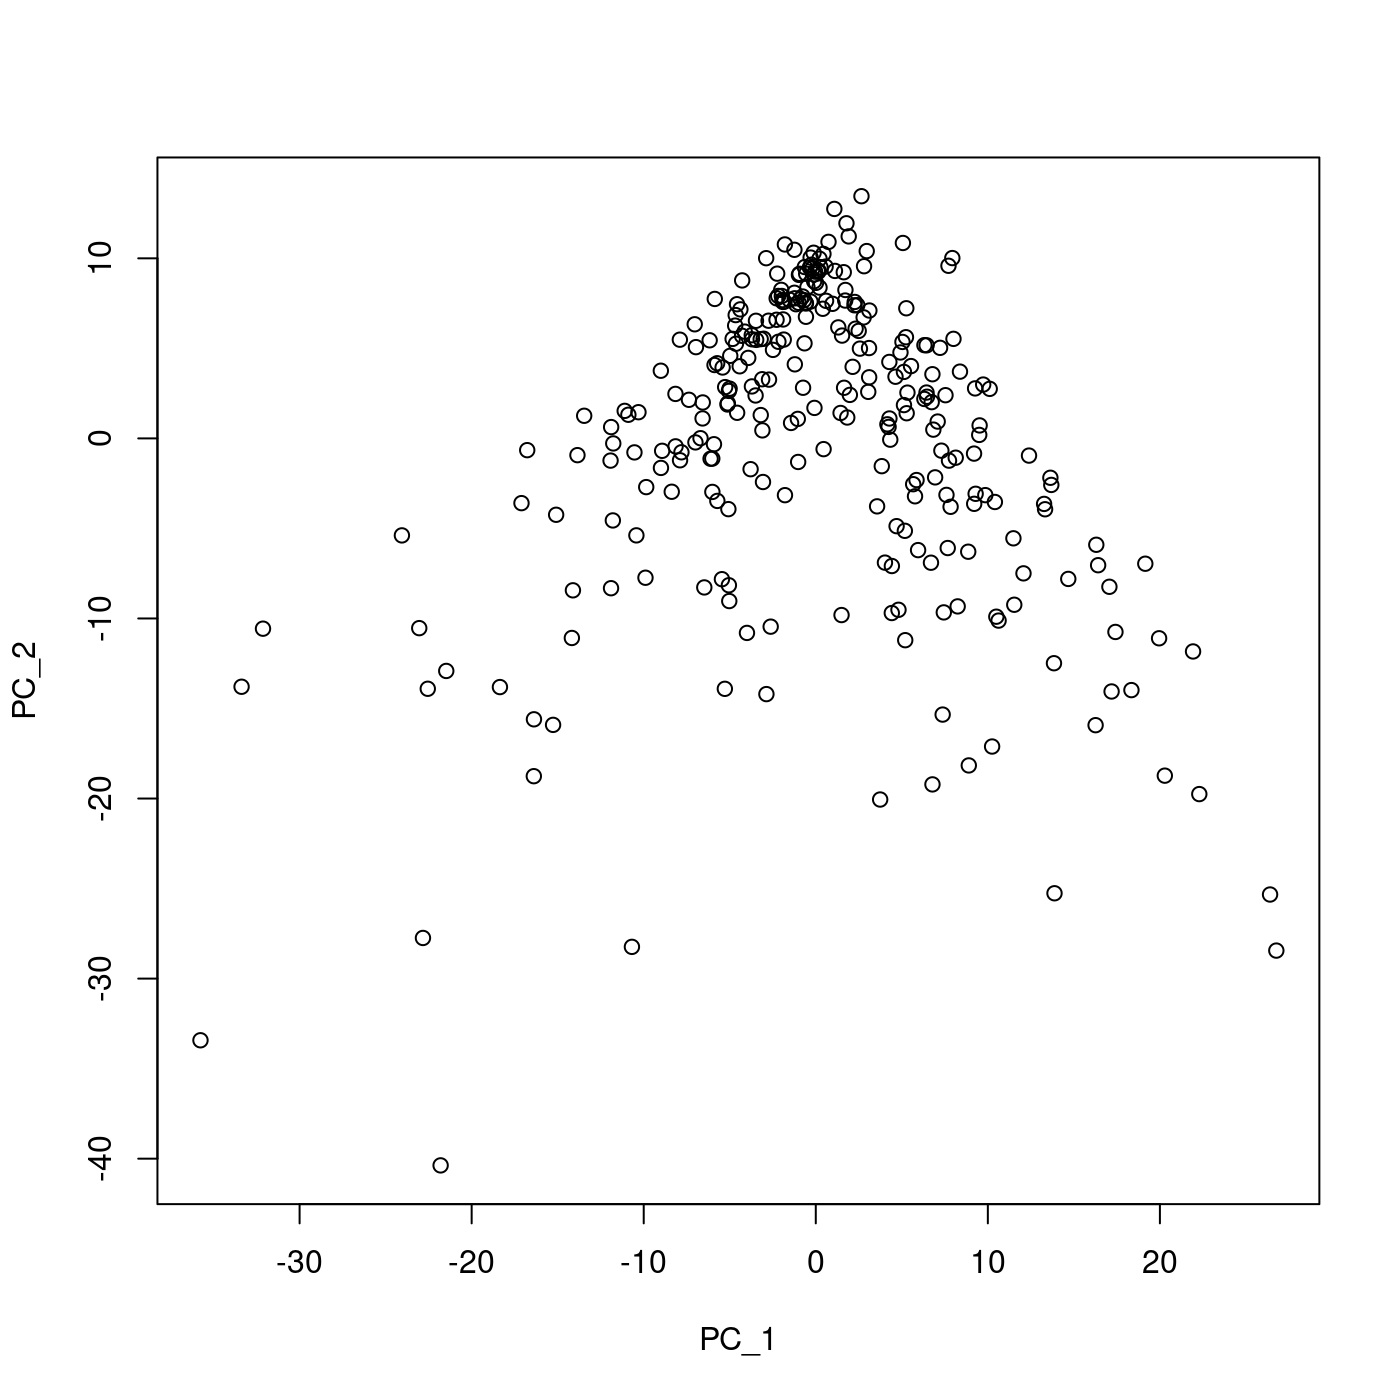 Figure 1. The result of PCA for the myoblast dataset